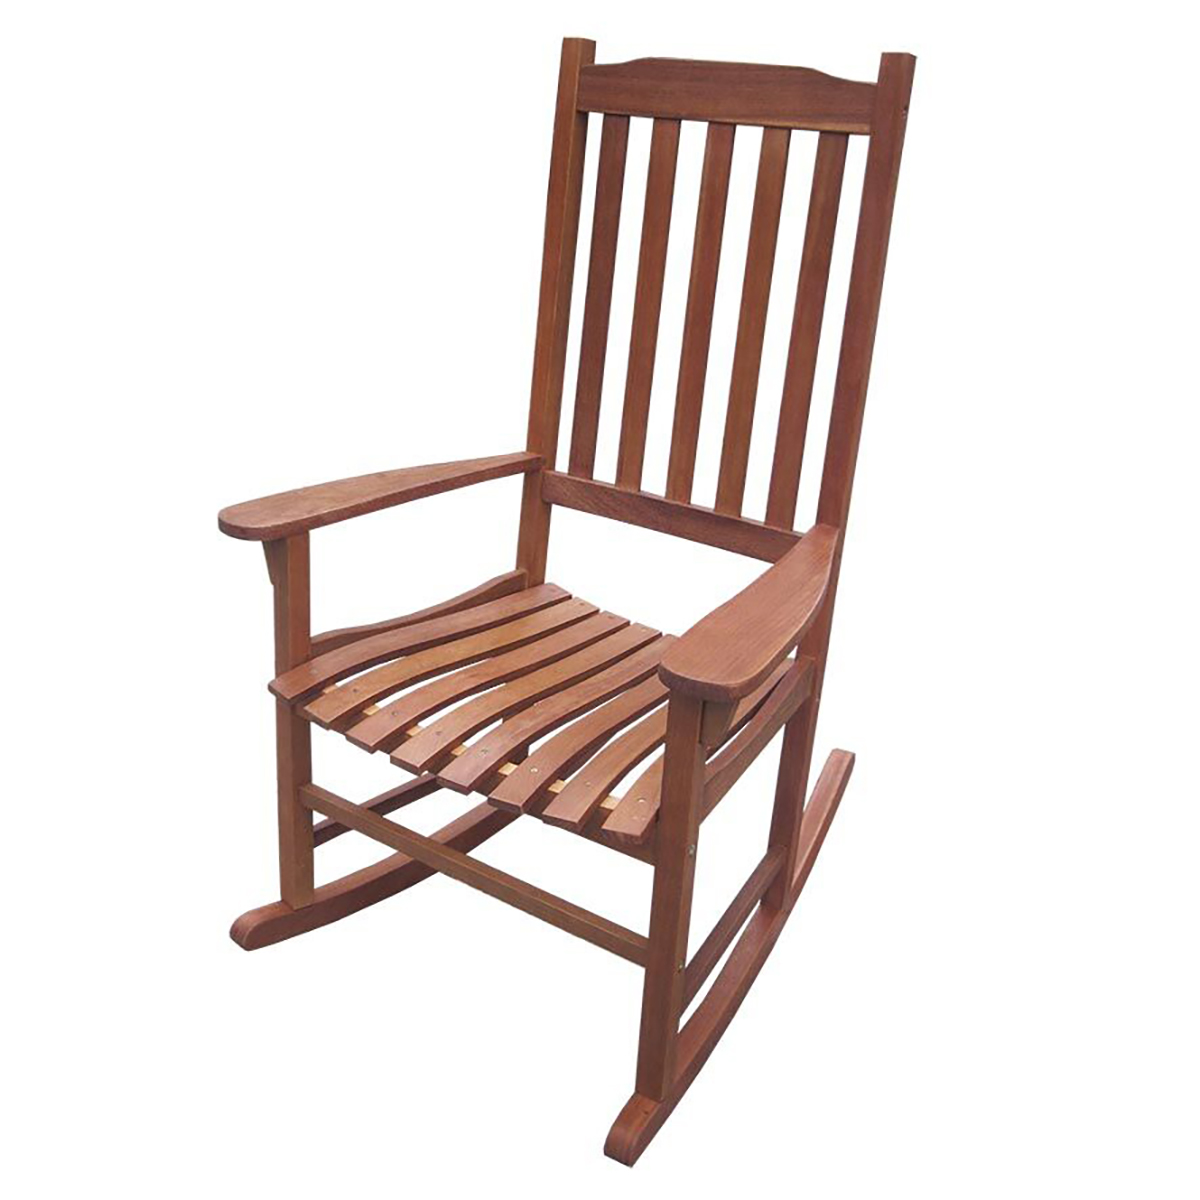 Northbeam Indoor Outdoor Acacia Wood Traditional Rocking Chair, Natural Stained - image 1 of 5